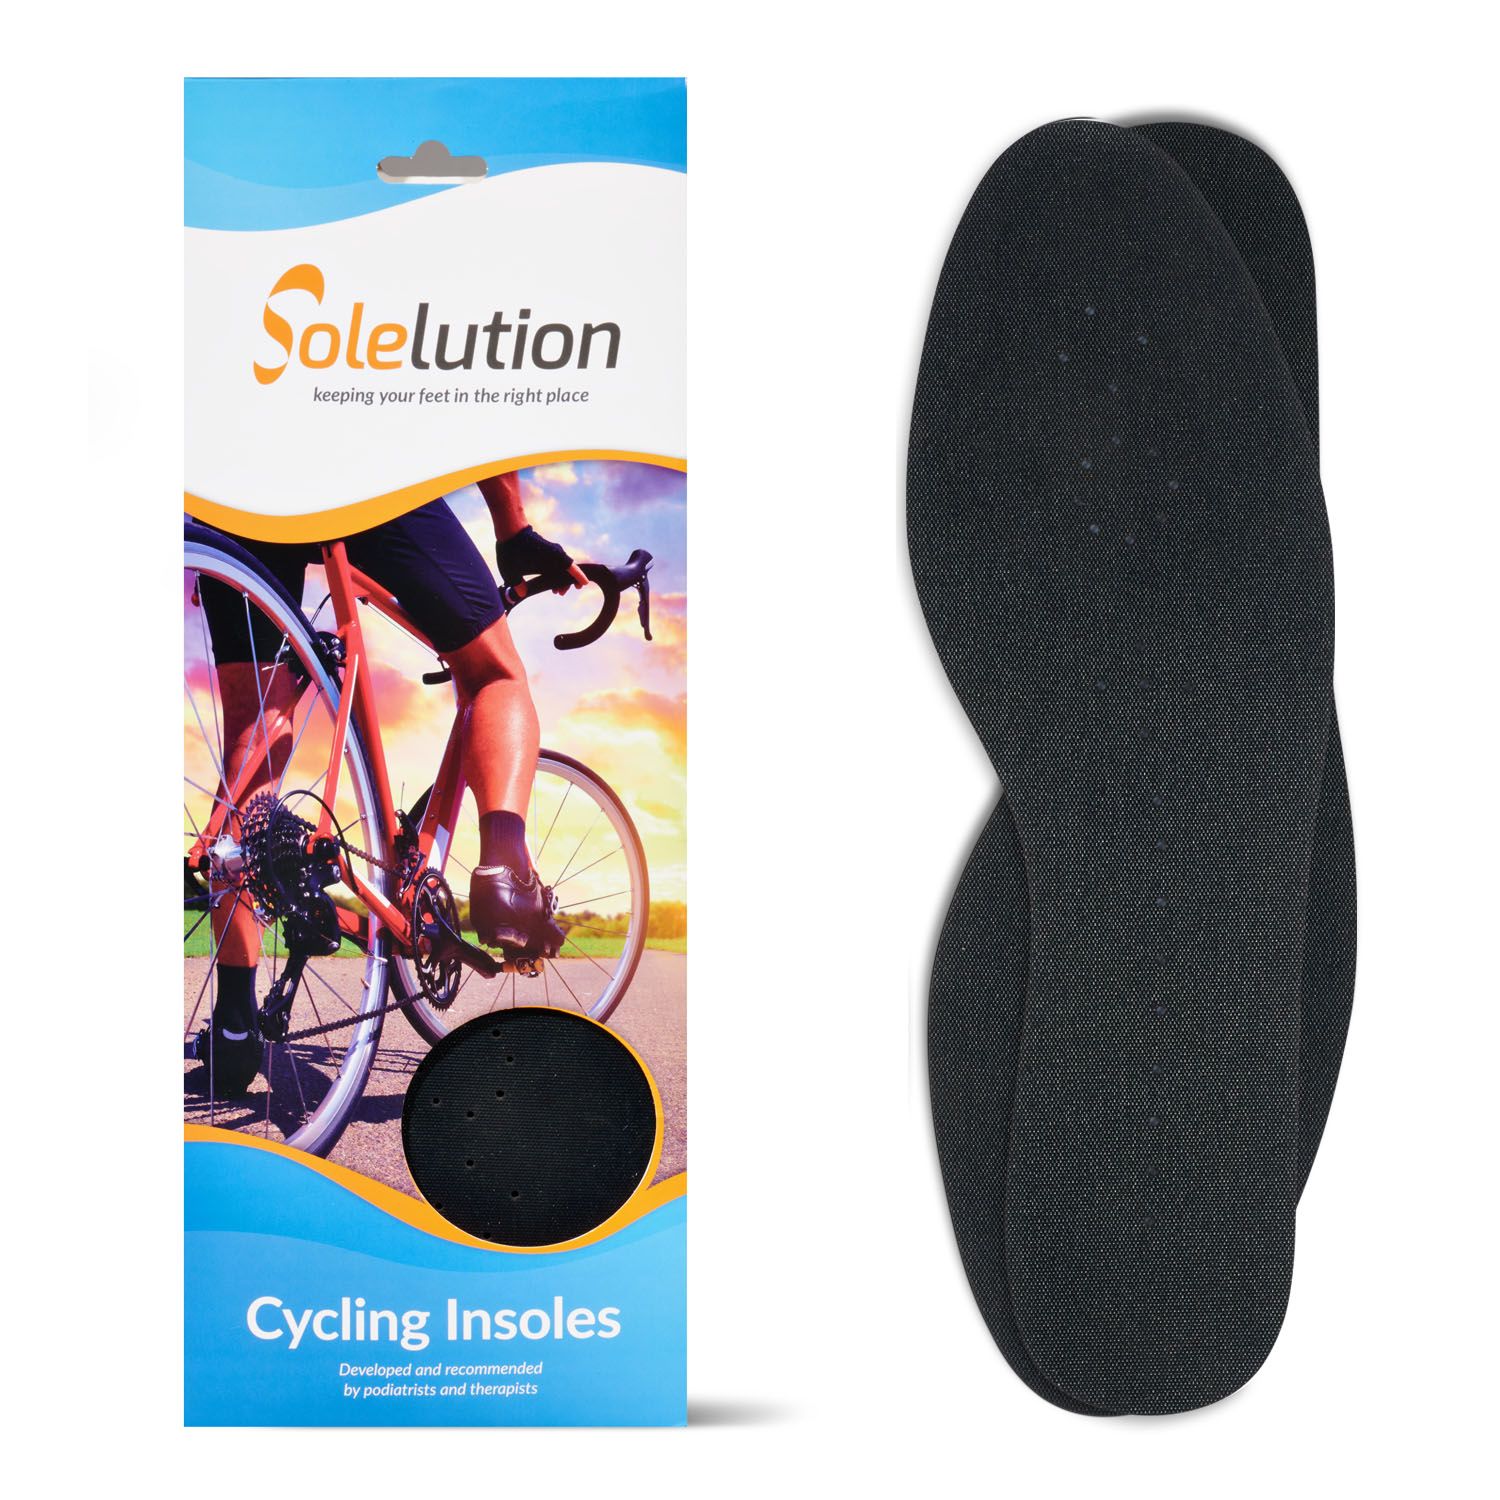 solelution cycling insoles in packaging